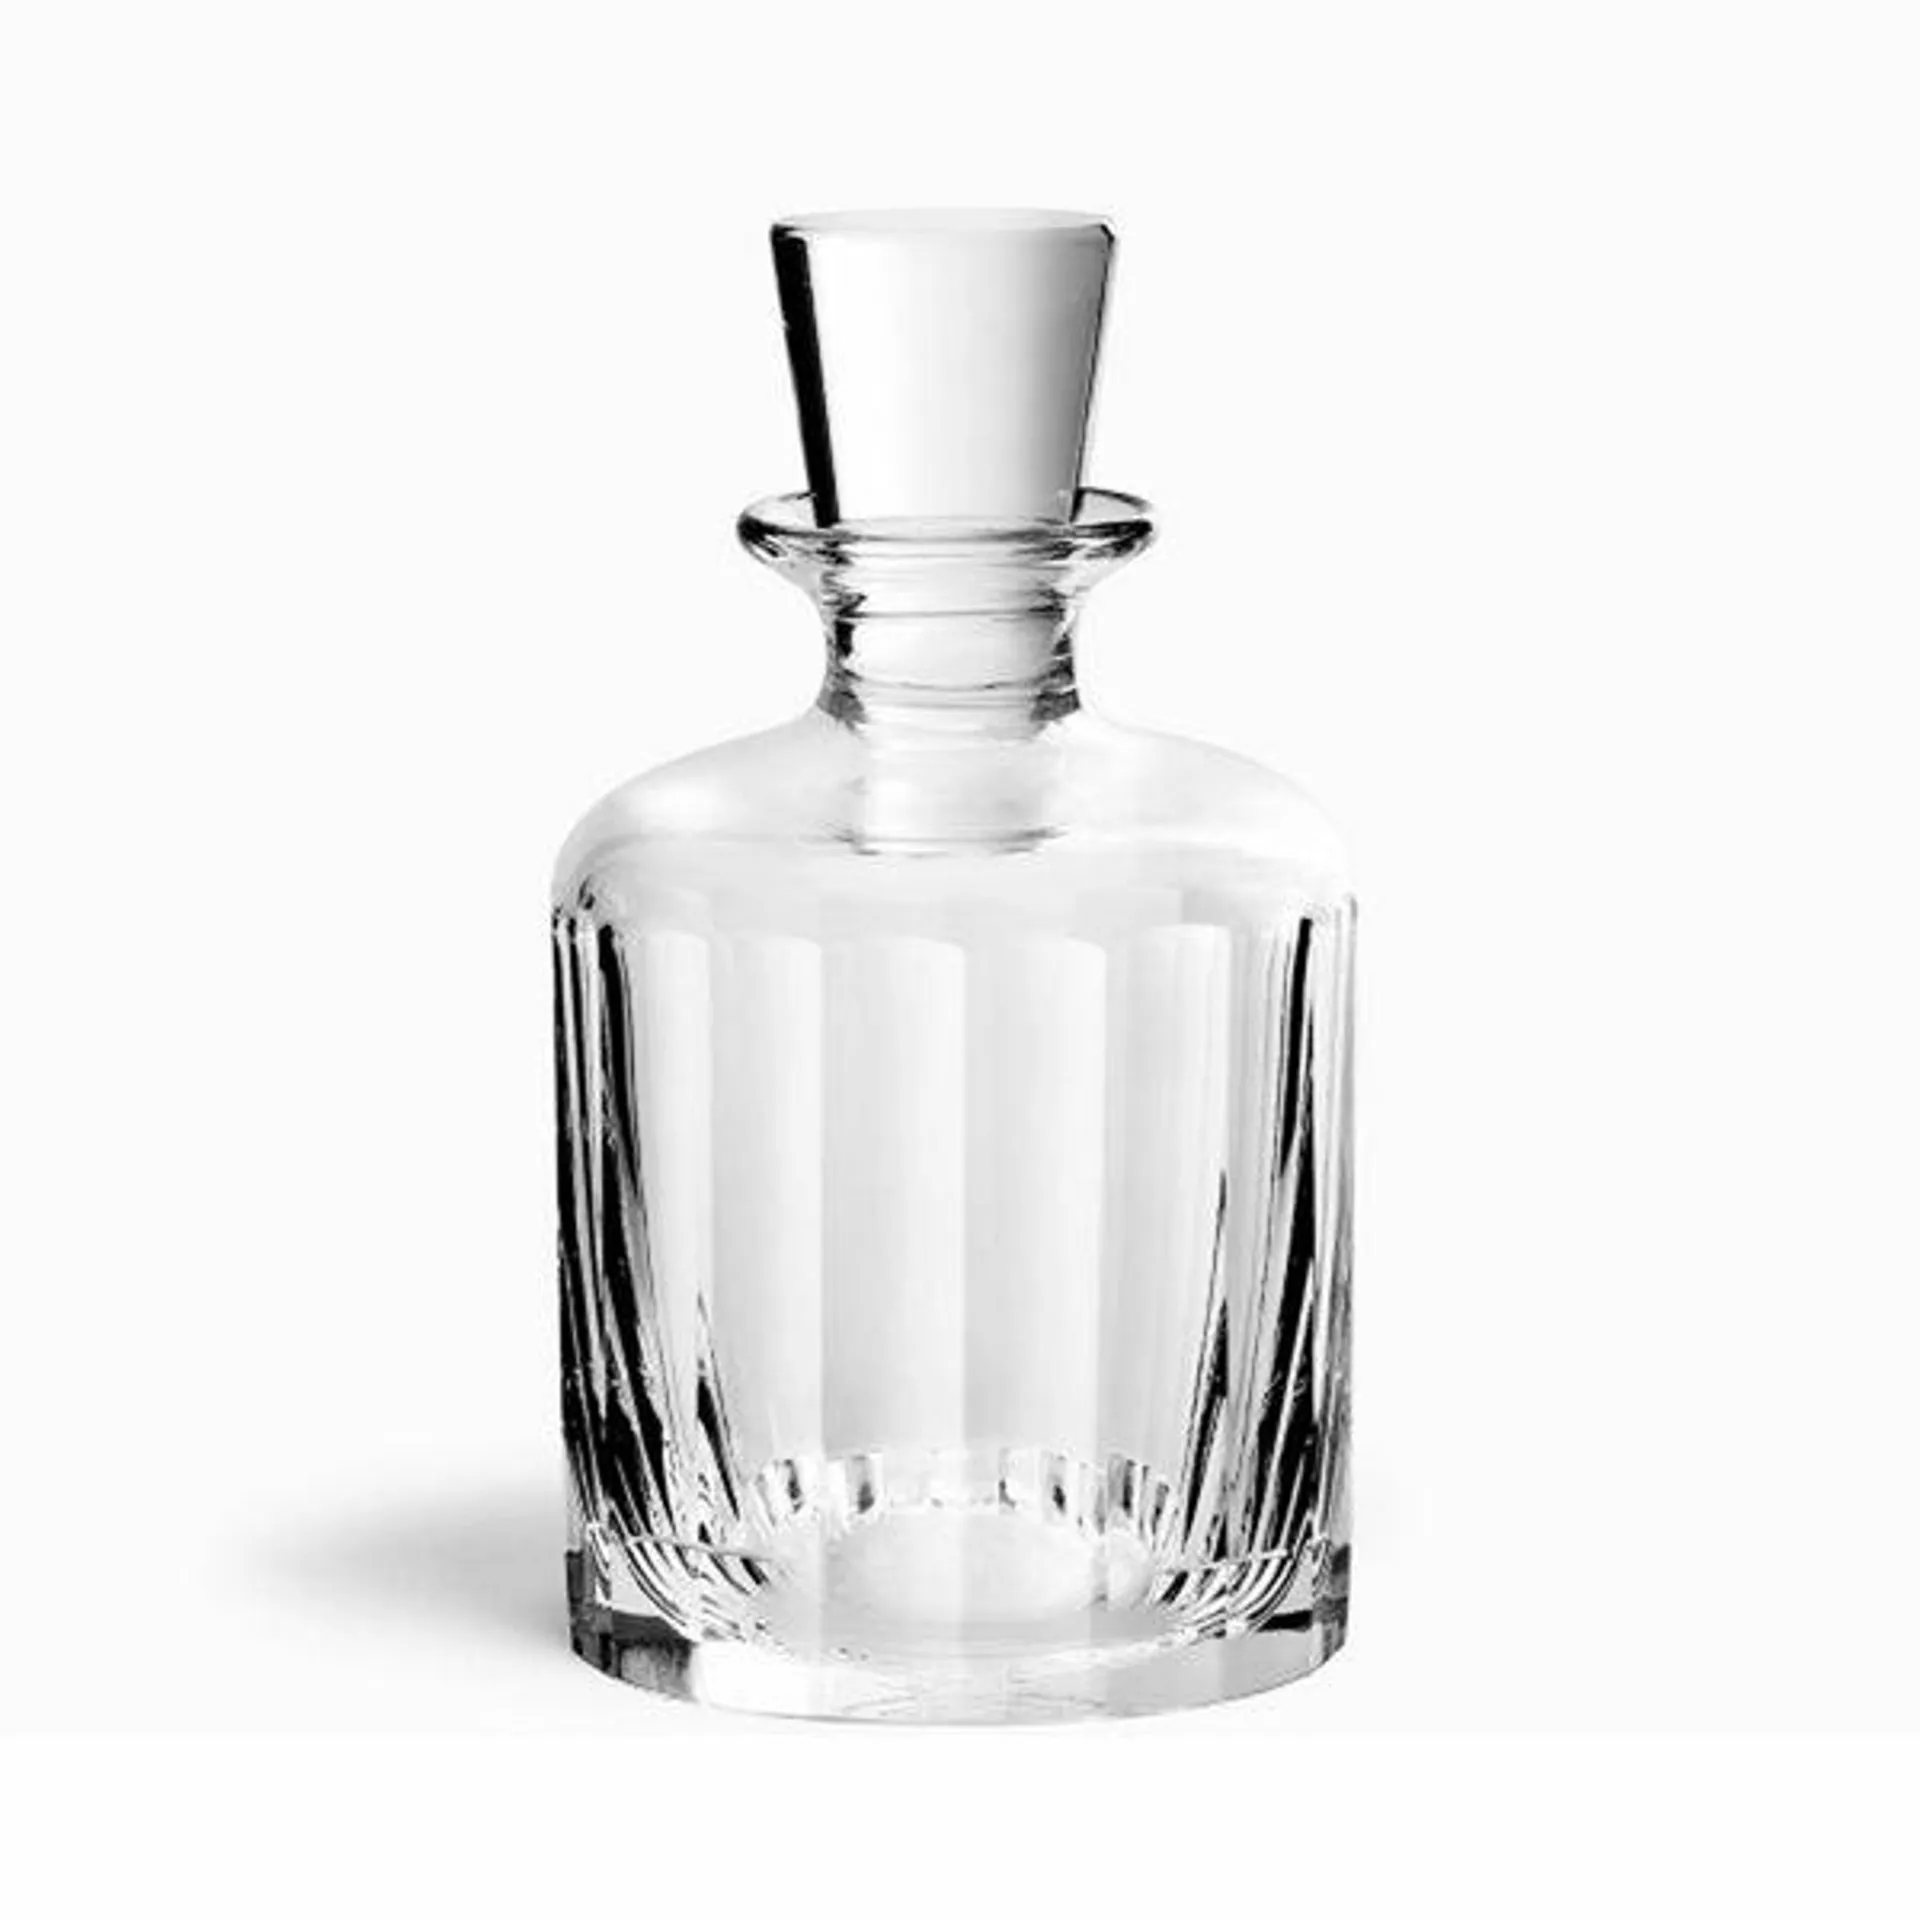 Richard Brendon Fluted Decanter Small - RBF009